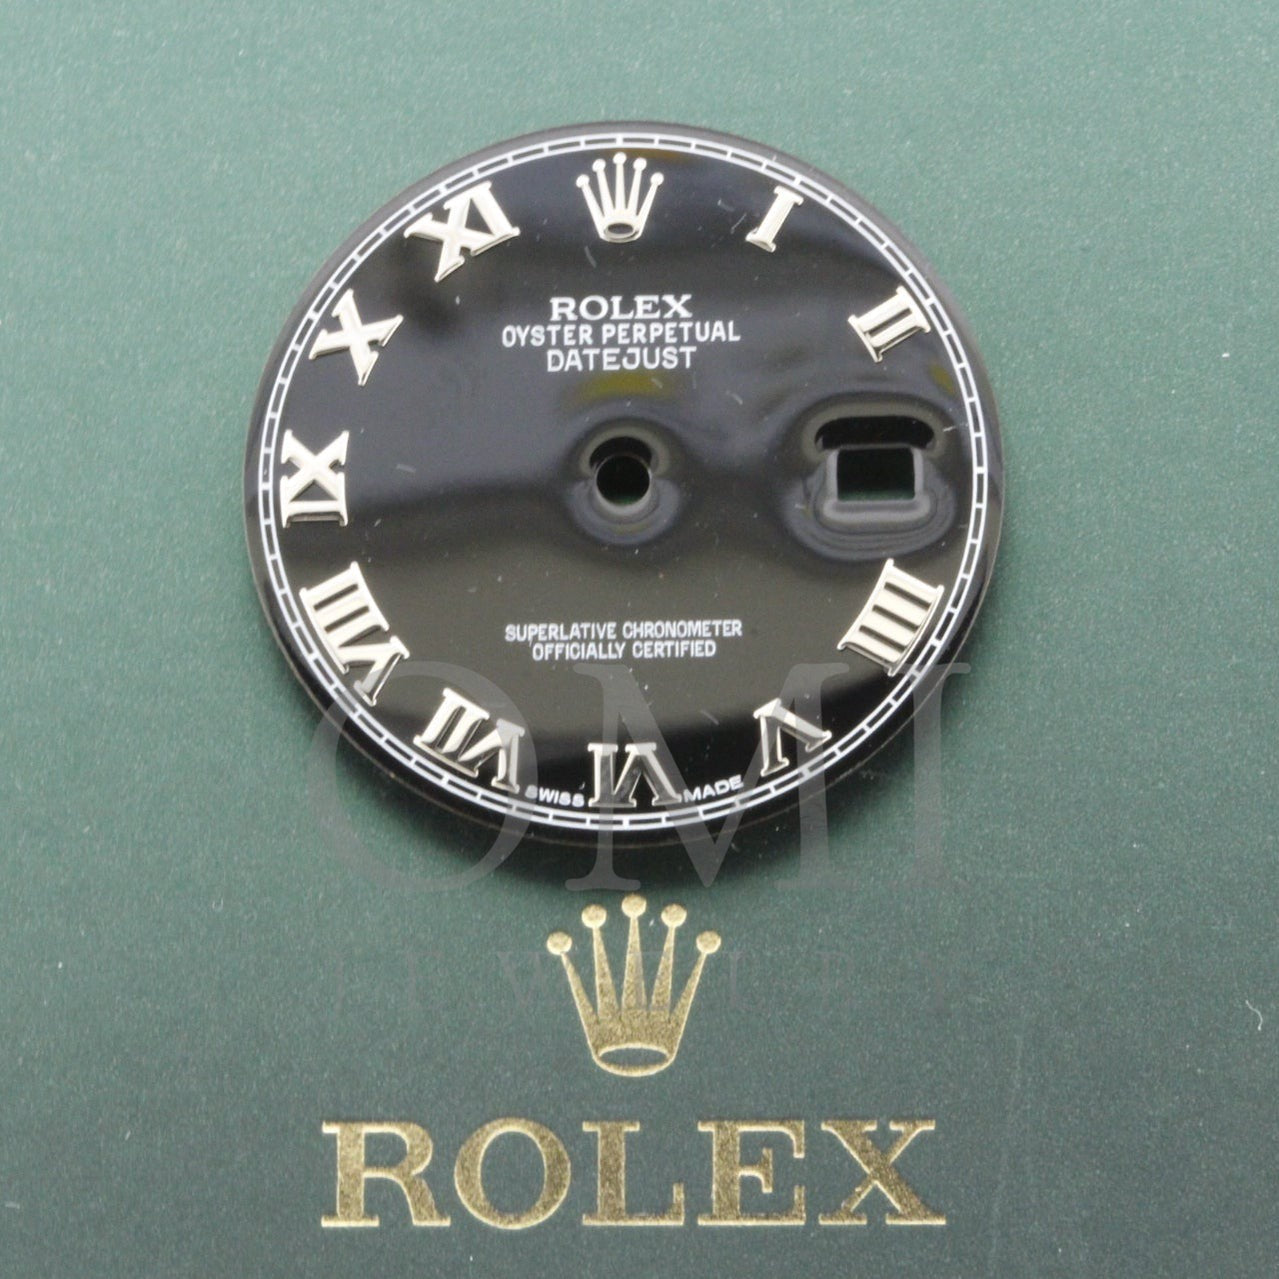 Factory datejust dial for 36mm - OMI Jewelry